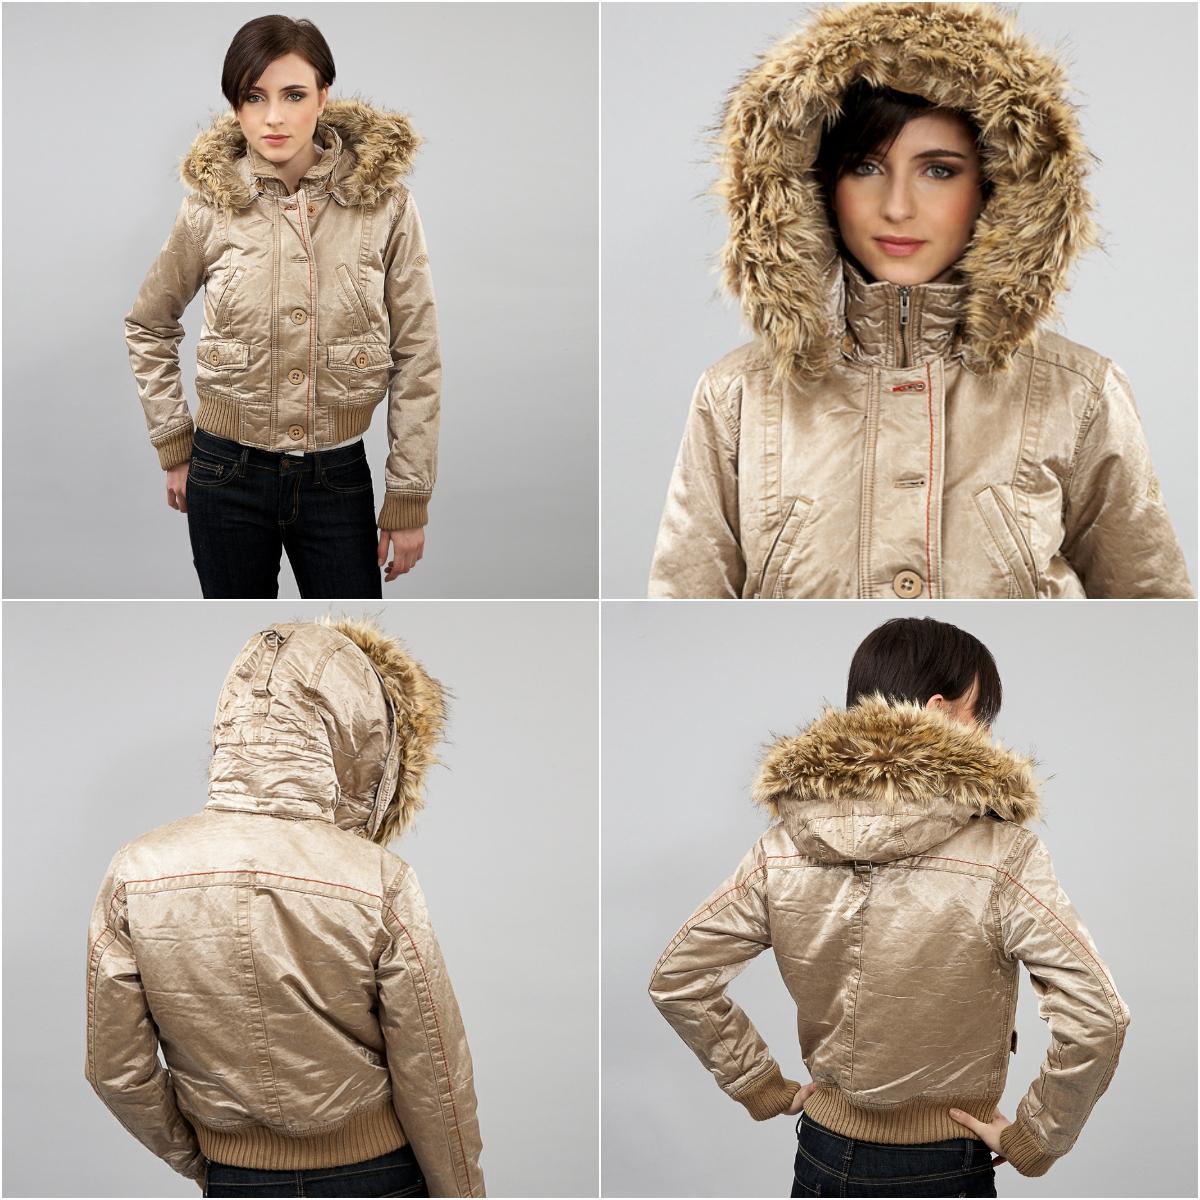 Da-Nang Jacket
Brand New w/ Tags
Size: Small
* Beige Gold Jacket
* Detachable Faux Fur Trim
Convertible Backpack!
* Removable Hood
*Rib Knit Trim on Cuff & Hem
* Zipper and Button Closure
* Slit & Front Flap Pockets
* Embroidered Logo on Sleeve
*